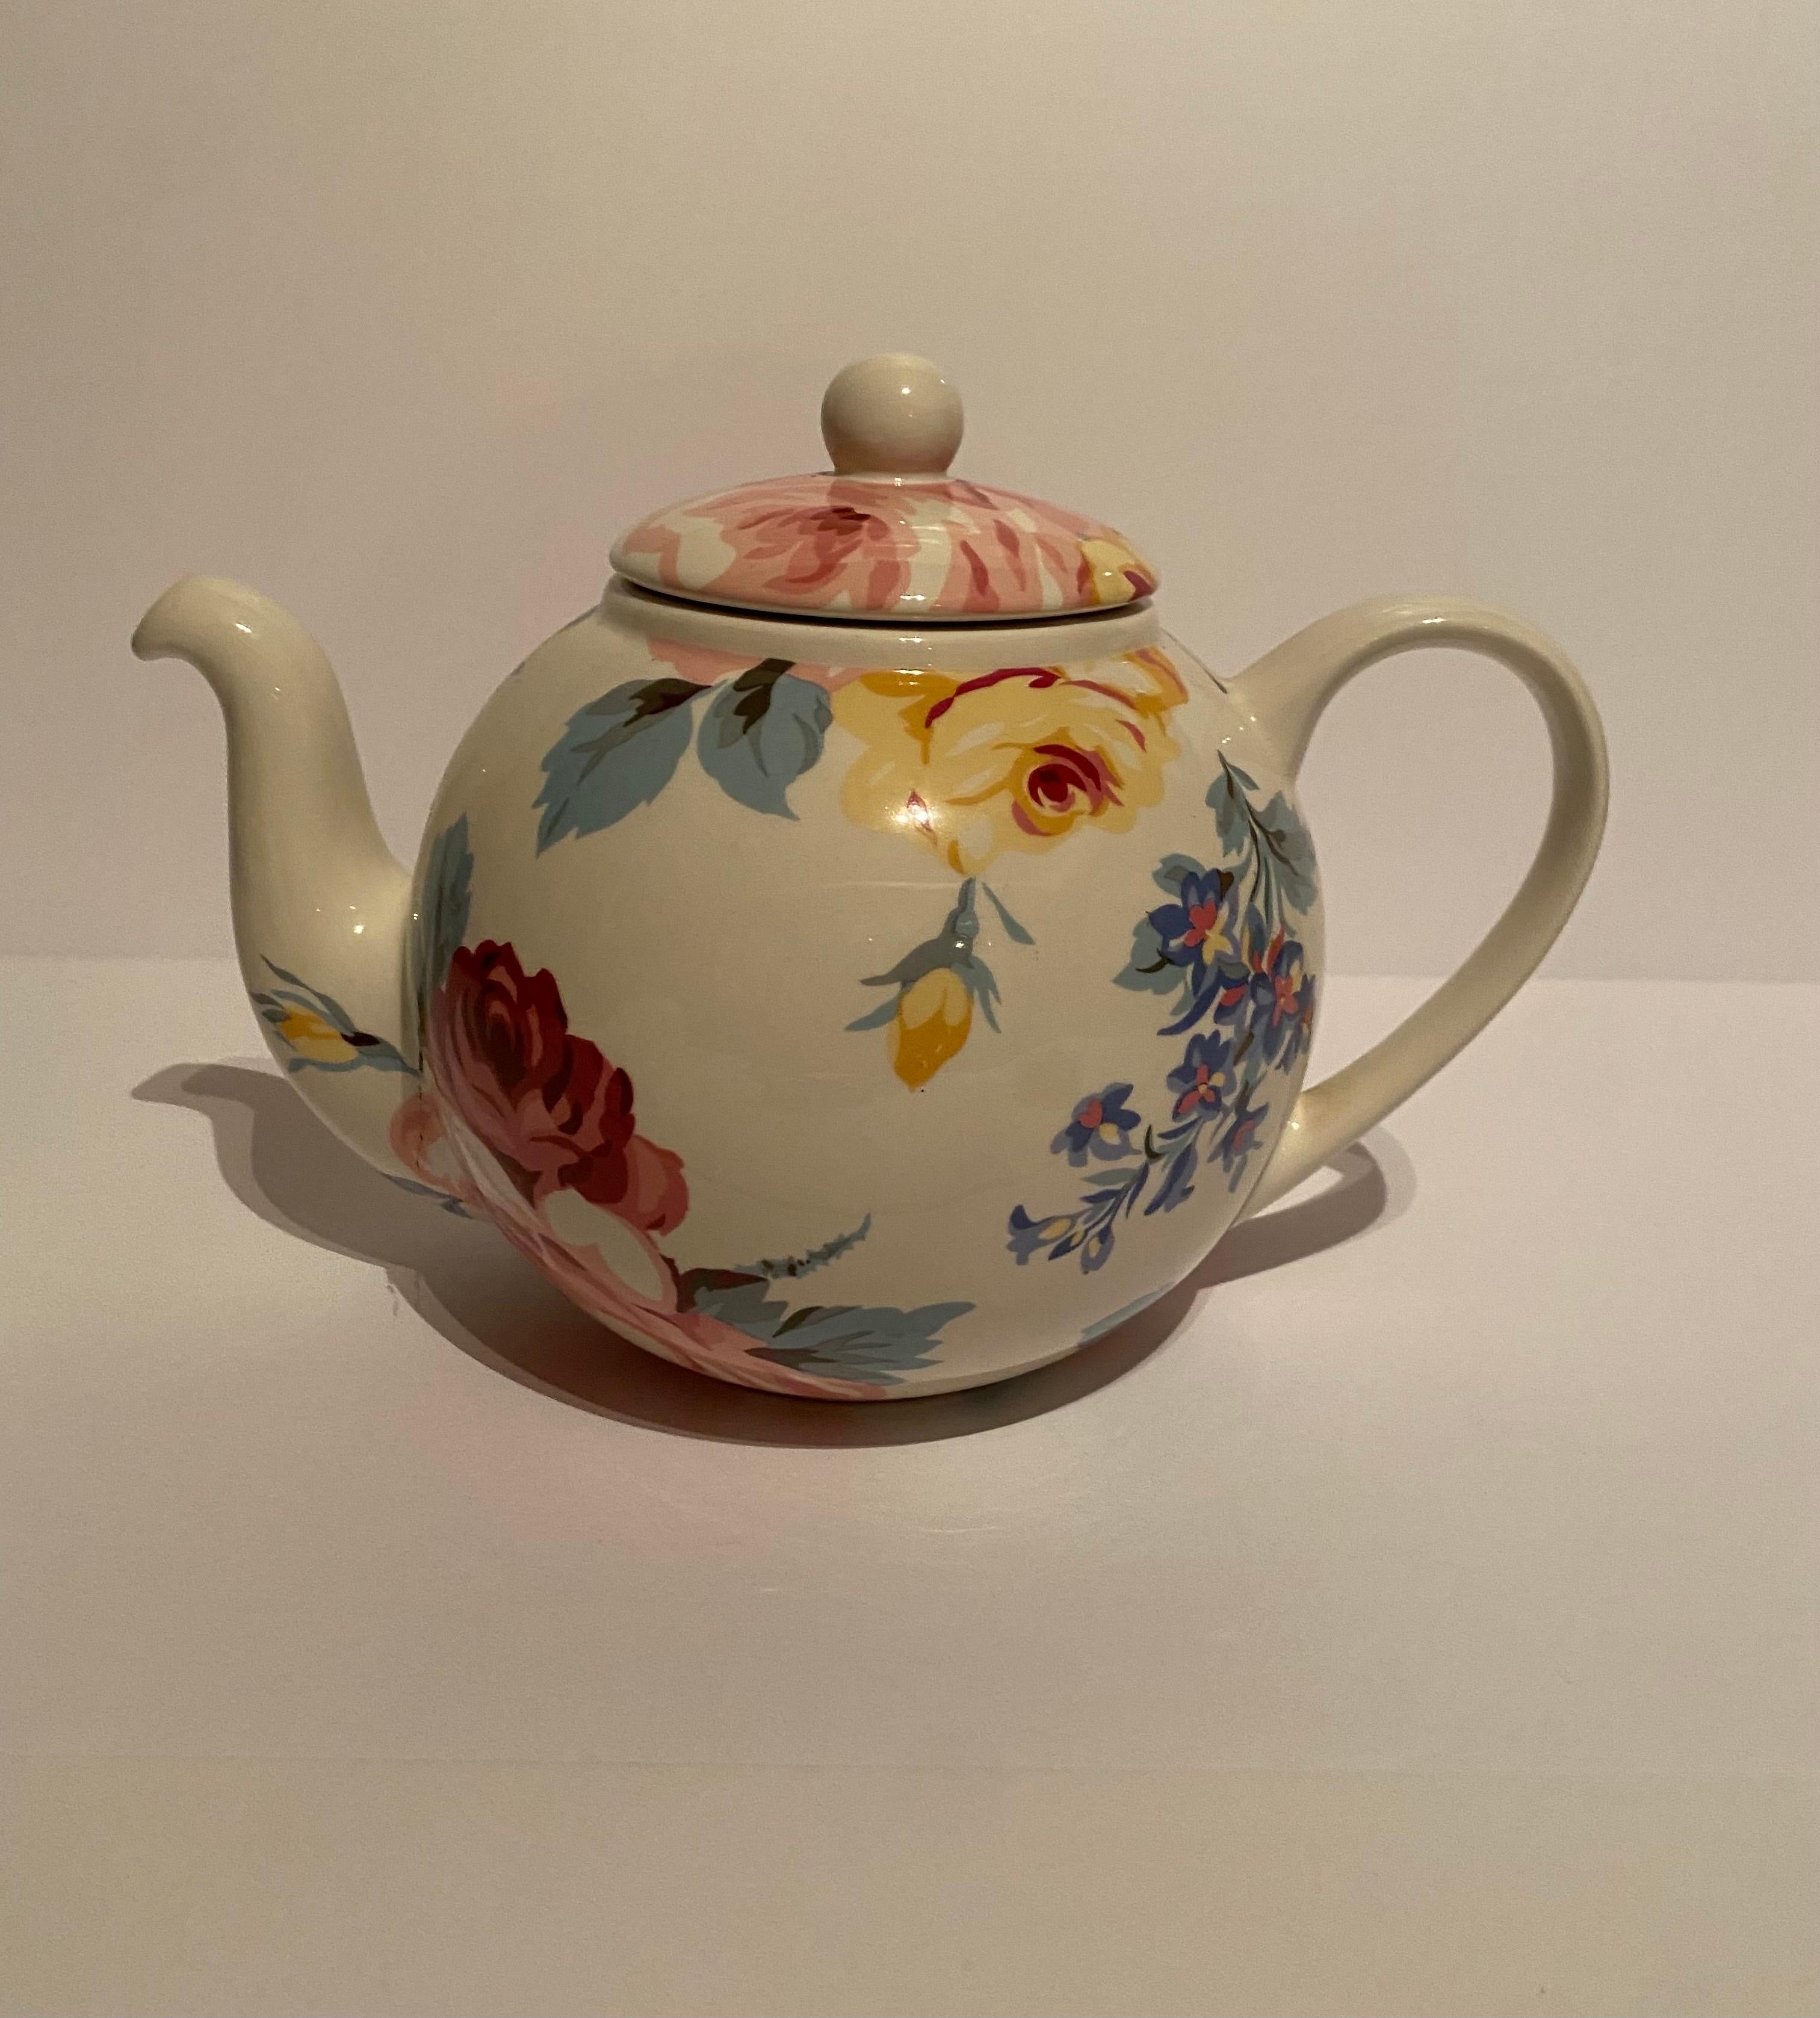 A teapot and lid in the Kirsty pattern by Ralph Lauren Home.

Features a pastel floral pattern on white.

Crafted In Portugal. Discontinued pattern; made from 1999 to 2001.

Dimensions: 10.25” L x 6” W x 7” H

Capacity: 6 cups.